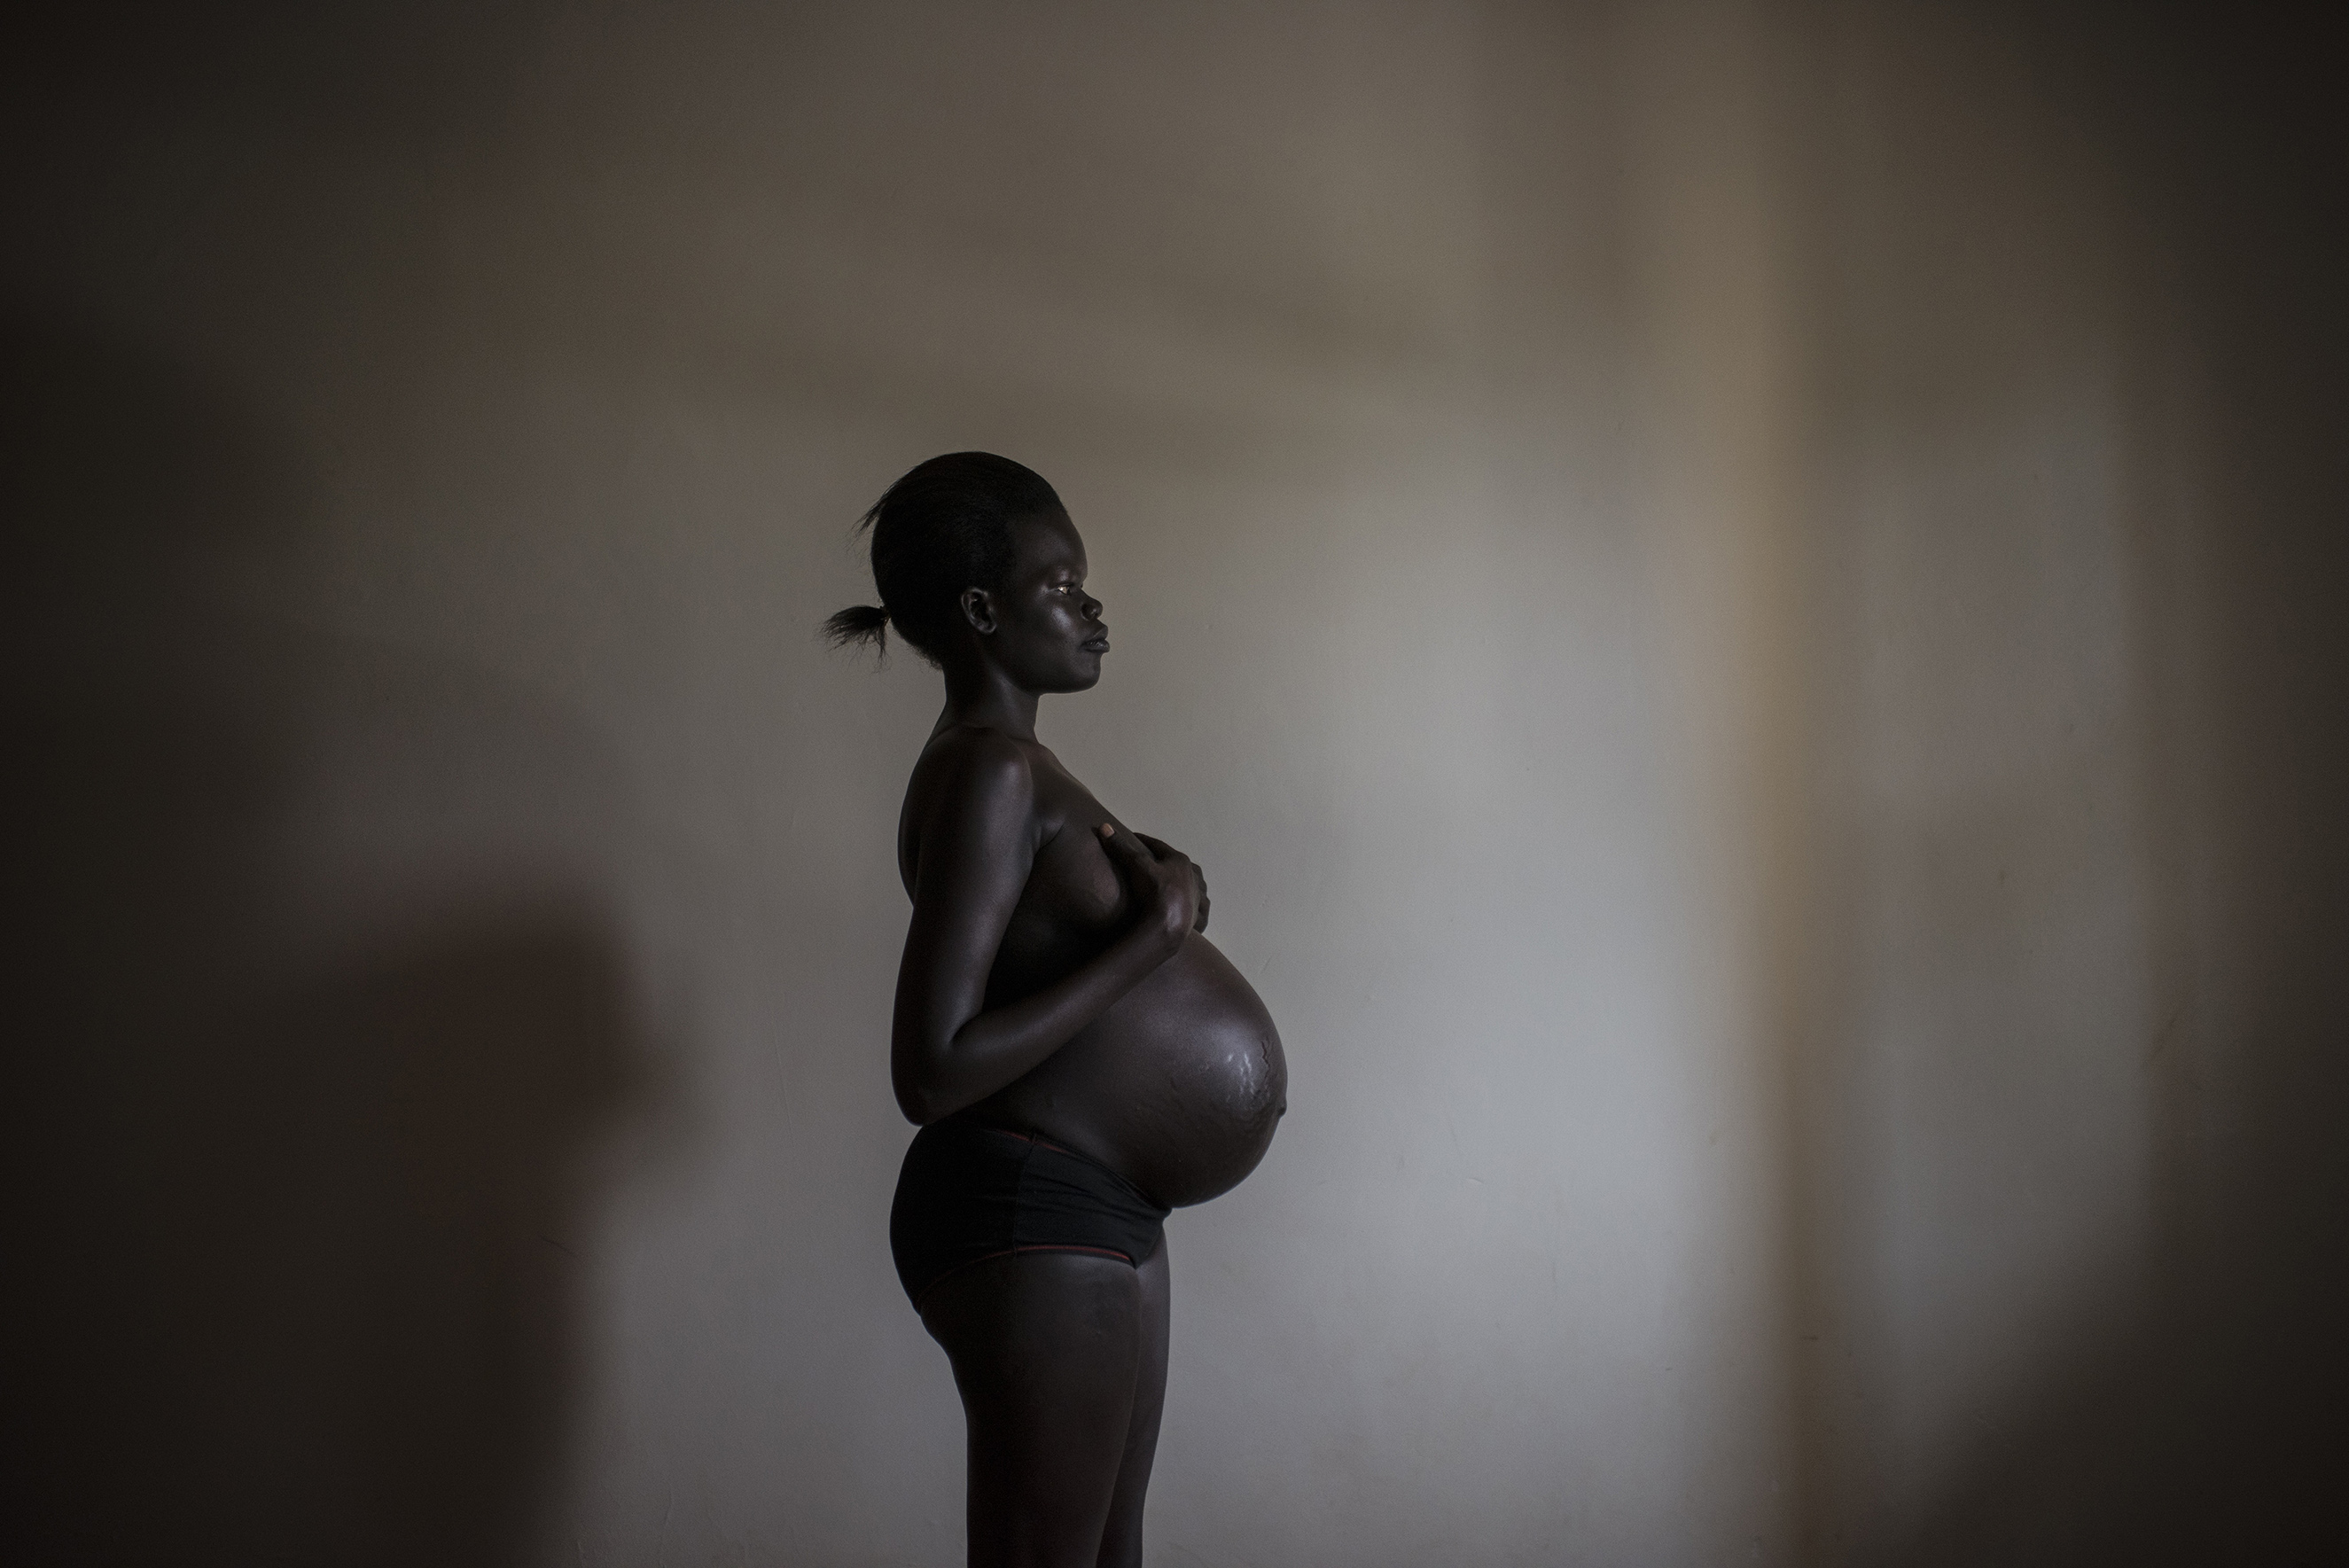 Ayak poses while nine months pregnant at a safe house in Uganda, Dec. 8, 2015. She lost her entire family to a rebel attack on her village near Bentiu, in South Sudan. She was raped while fleeing, alone, for a U.N. camp, and then raped repeatedly while she was at the camp. One of her rapists gave her HIV. Ayak says that her unborn child is the only family she is likely to ever have.From  The Secret War Crime: How Do You Ask Women to Relive Their Worst Nightmares?